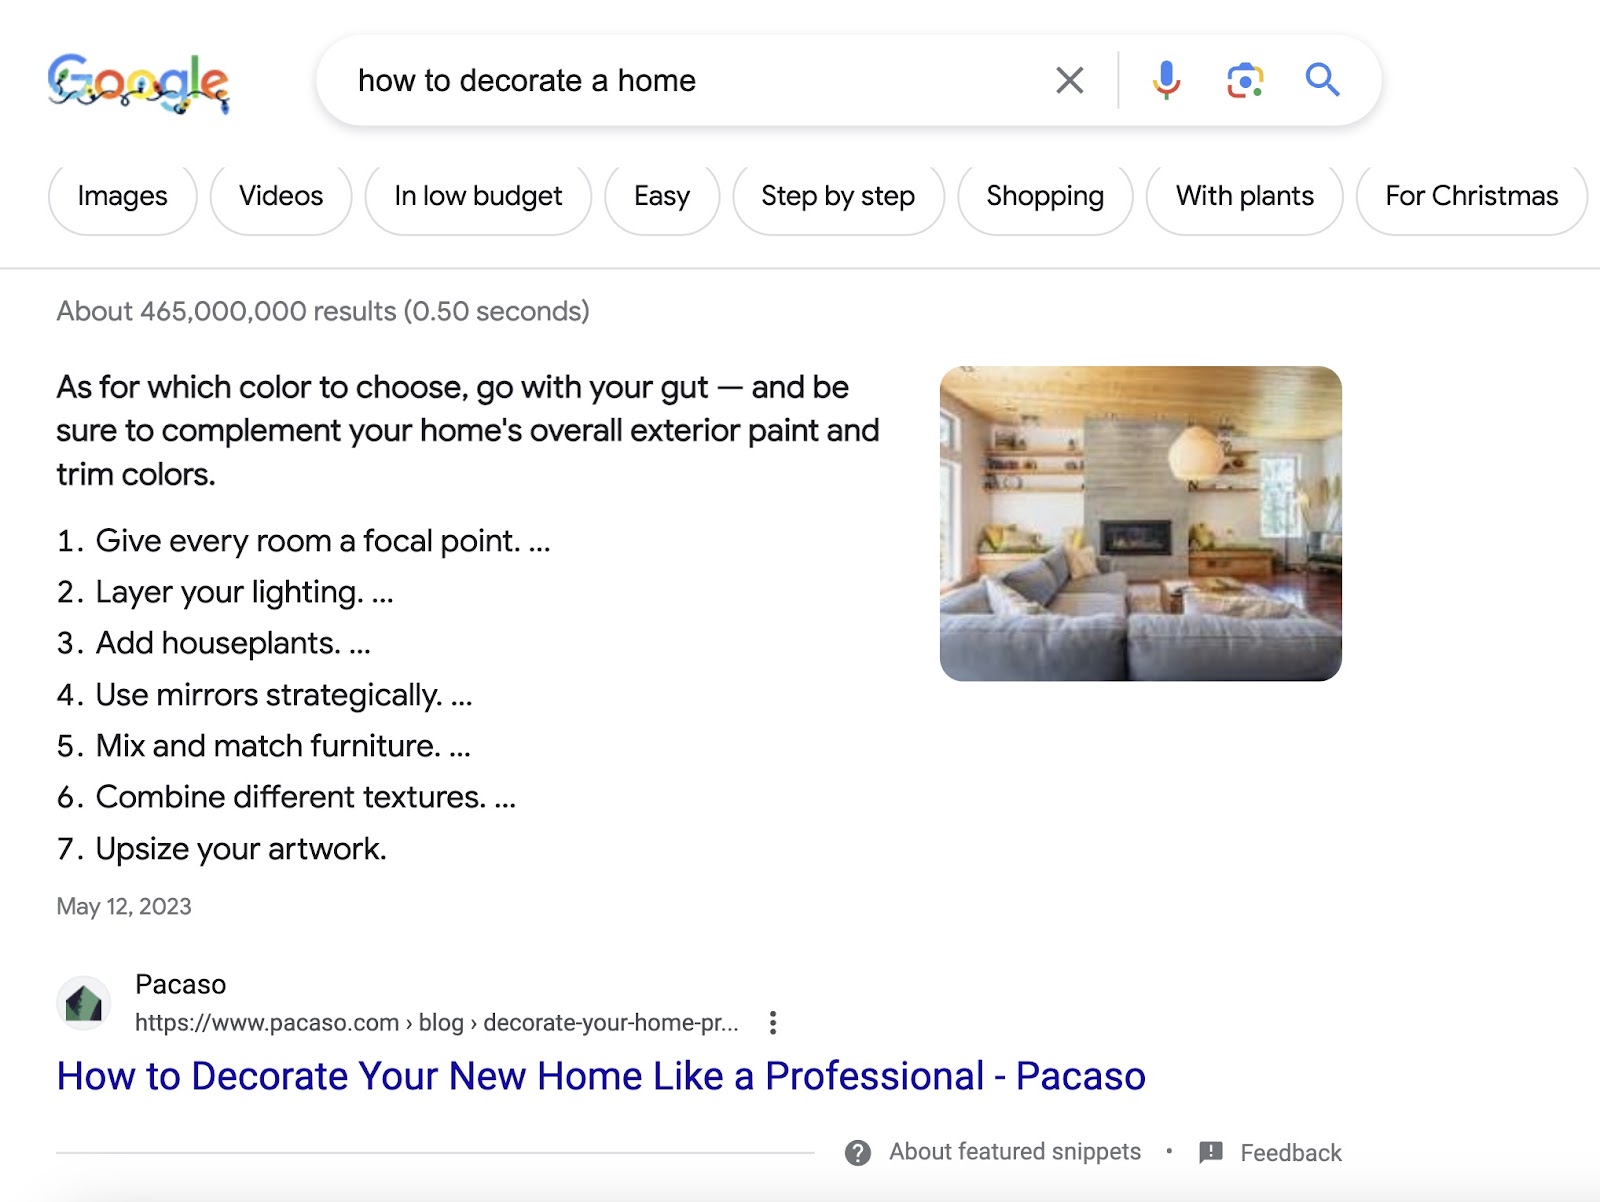 Pacaso's "how-to" article ranks as the featured snippet for "how to decorate a home" query